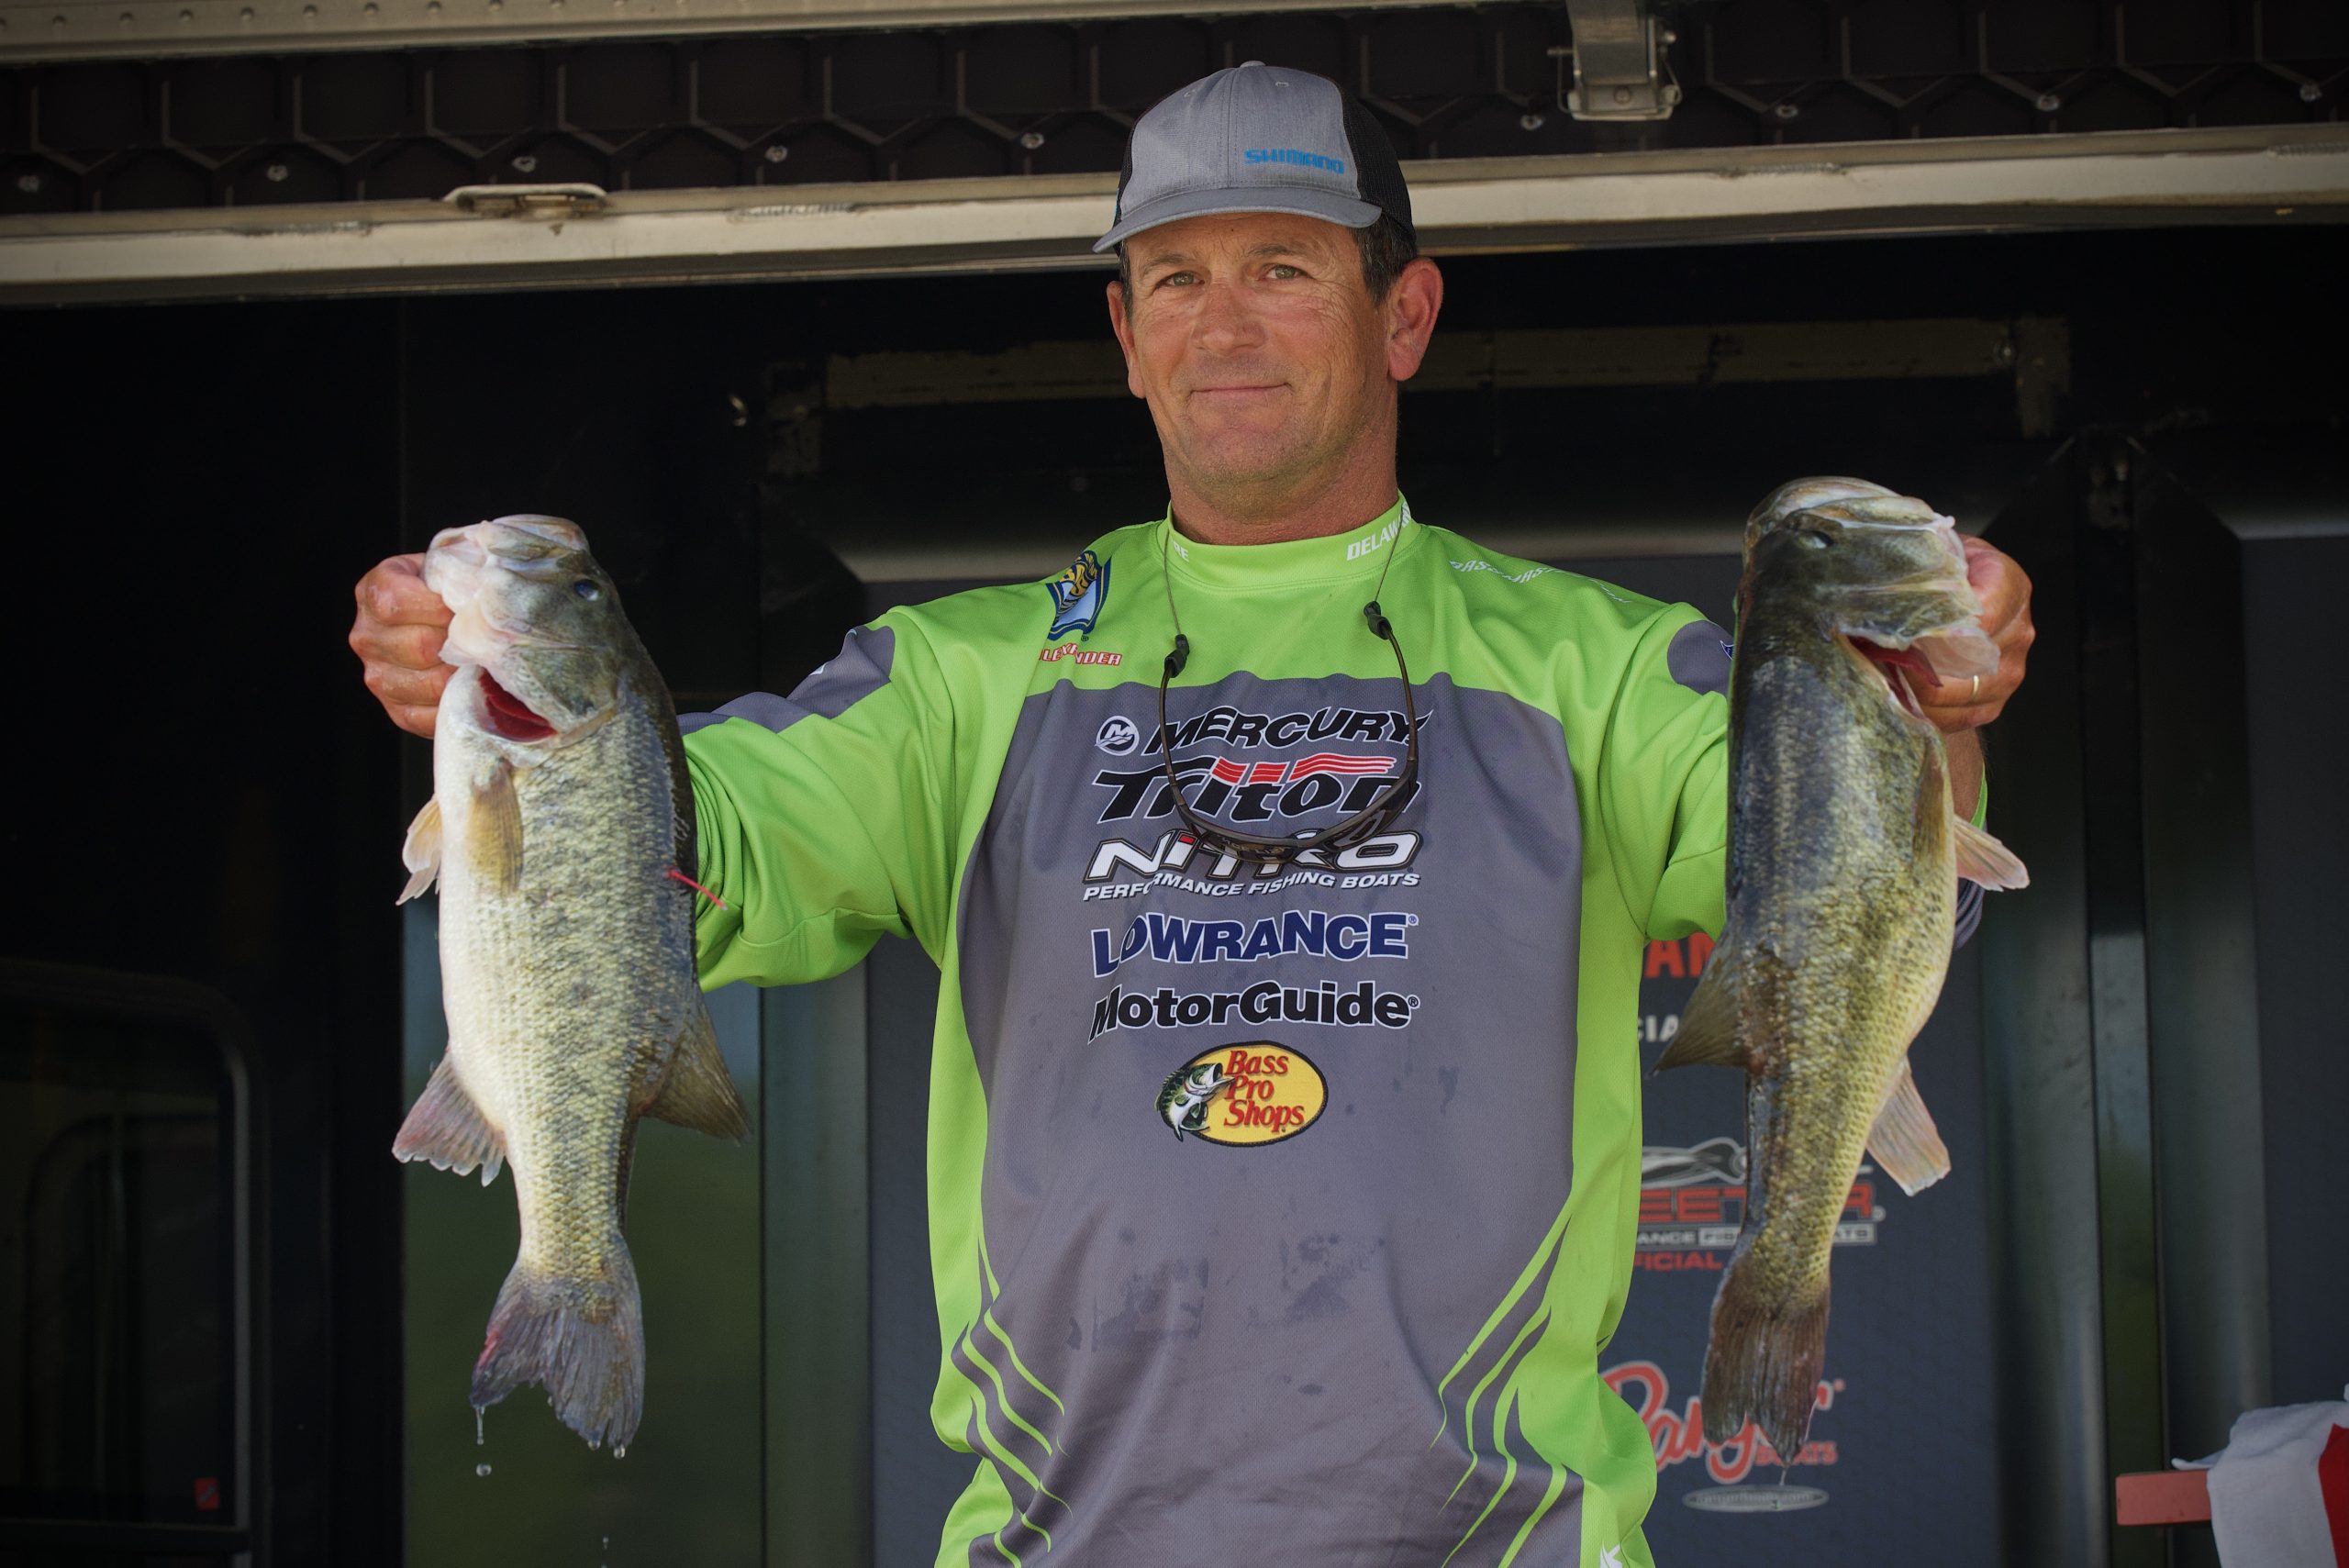 Unique Crankbait Pattern Puts Iaconelli First in Northern Open Points